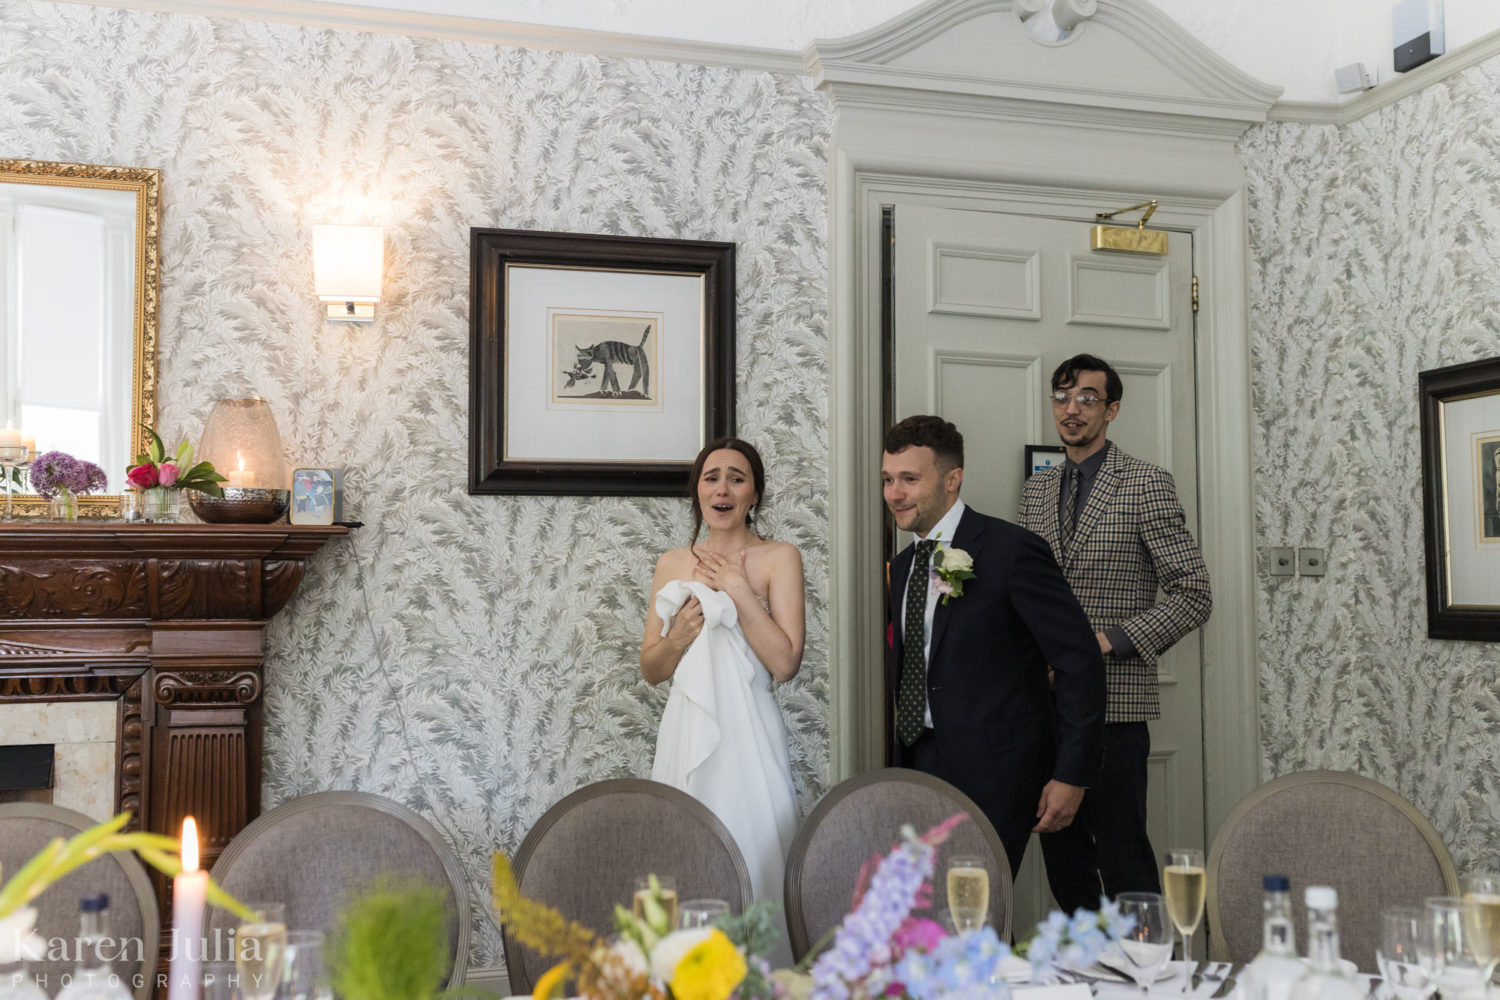 bride and groom see the wedding breakfast room for the first time and are overcome with emotion